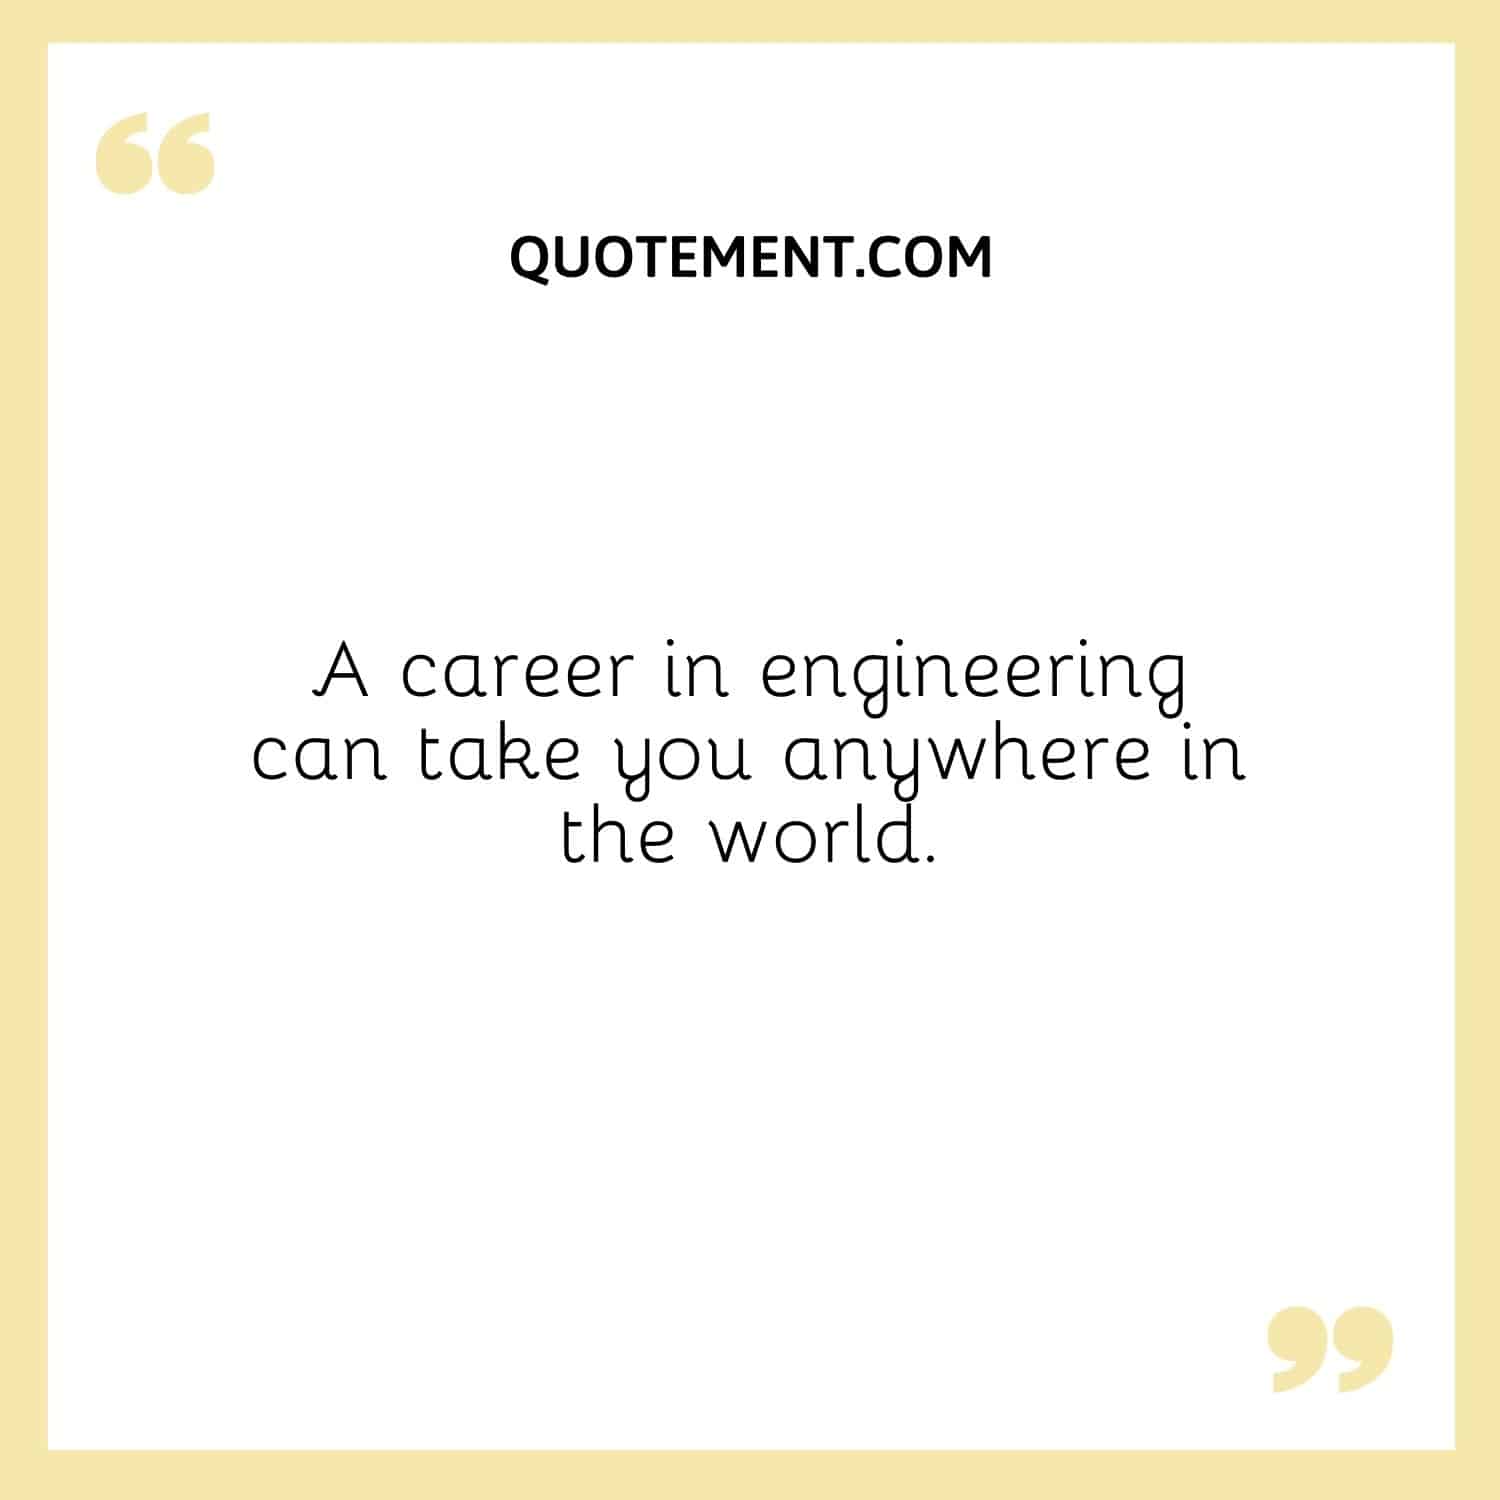 A career in engineering can take you anywhere in the world.